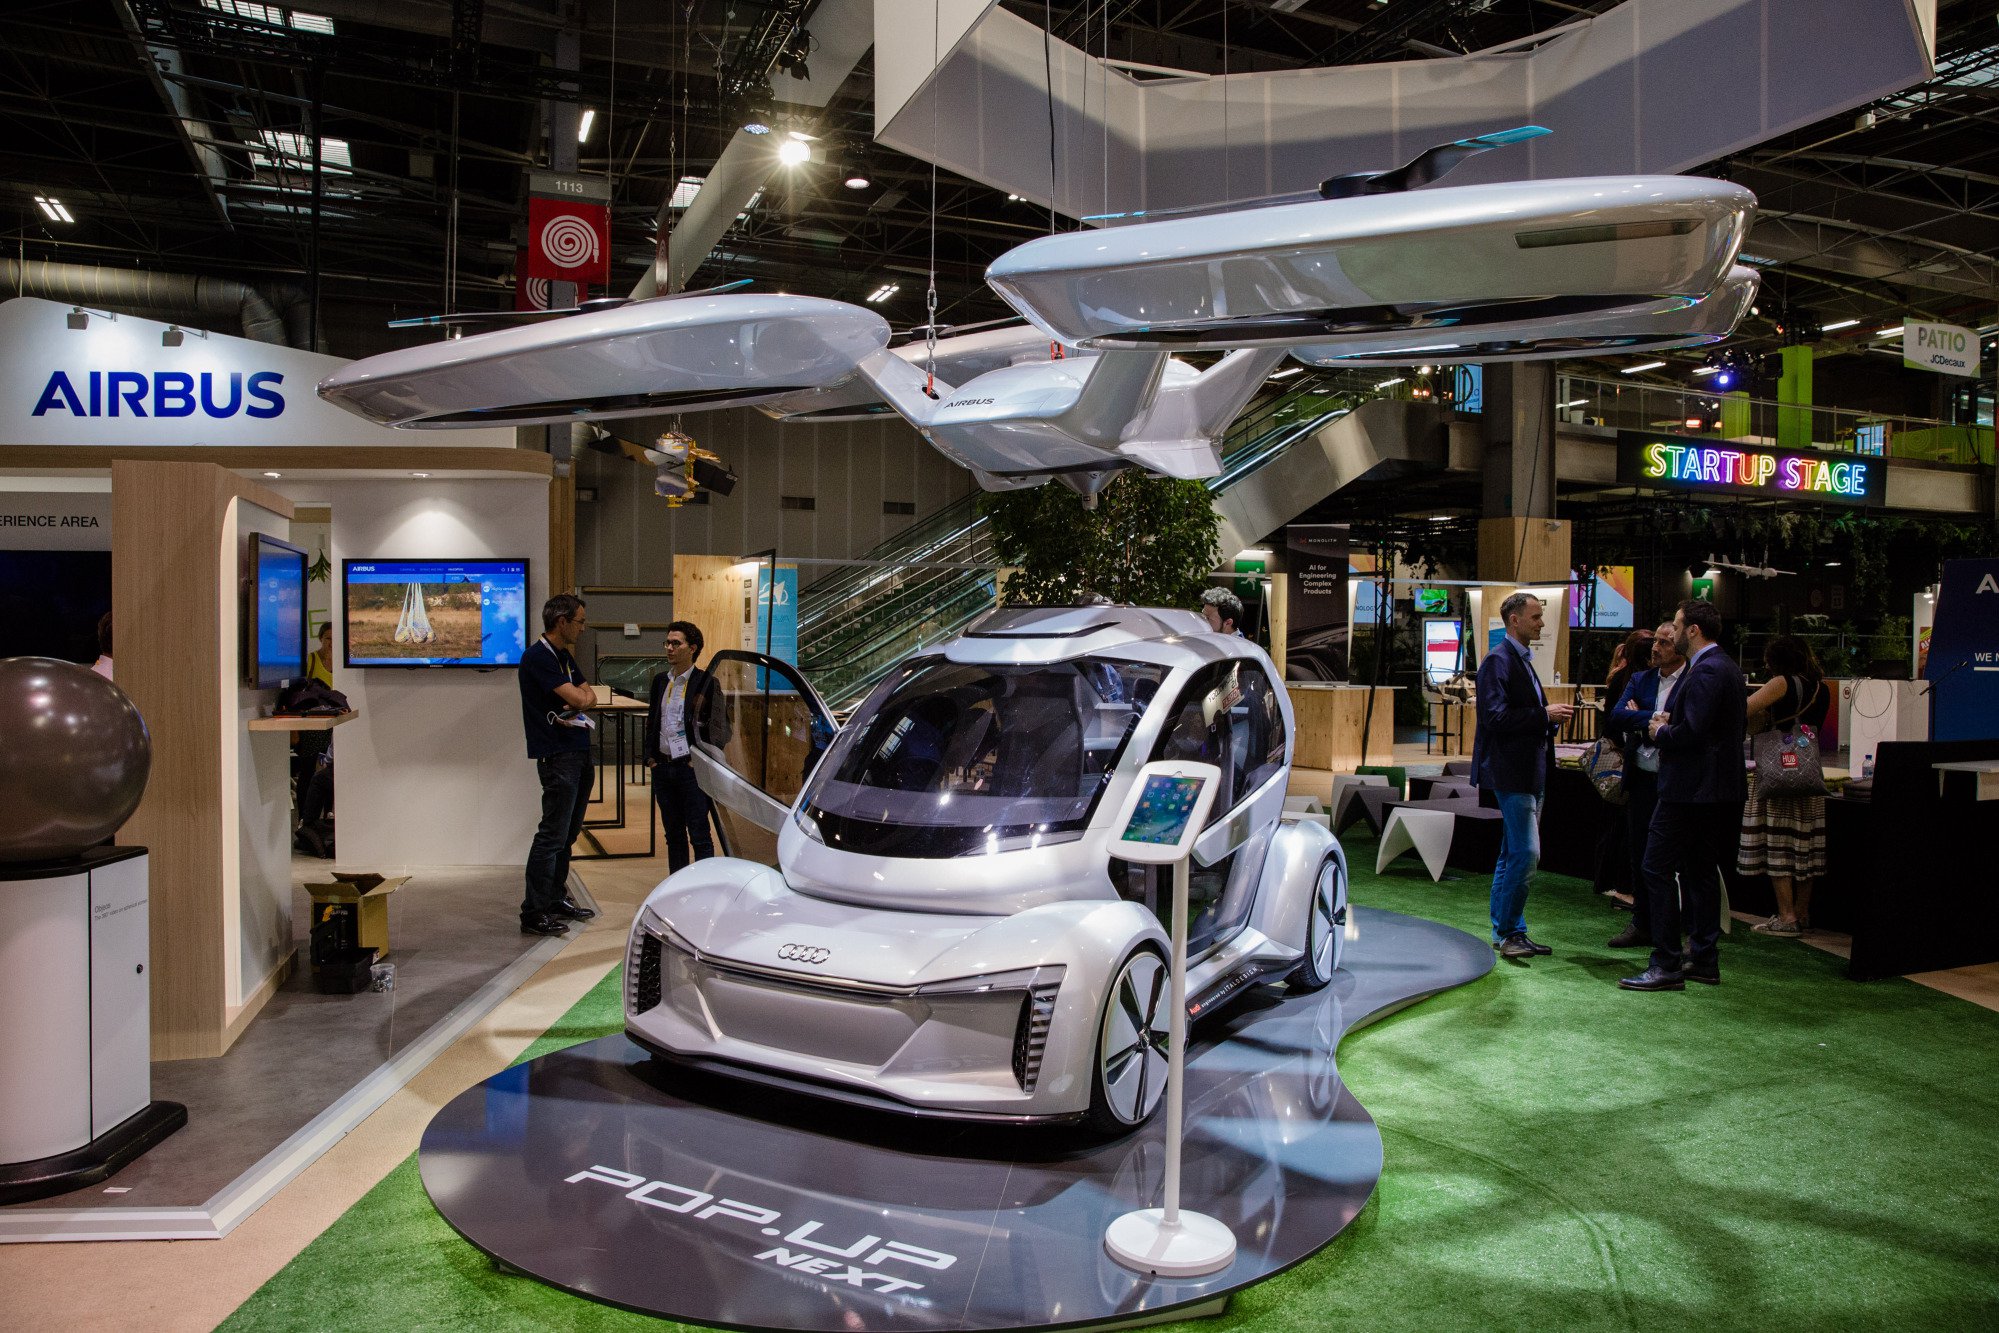 In Germany tests a flying taxi